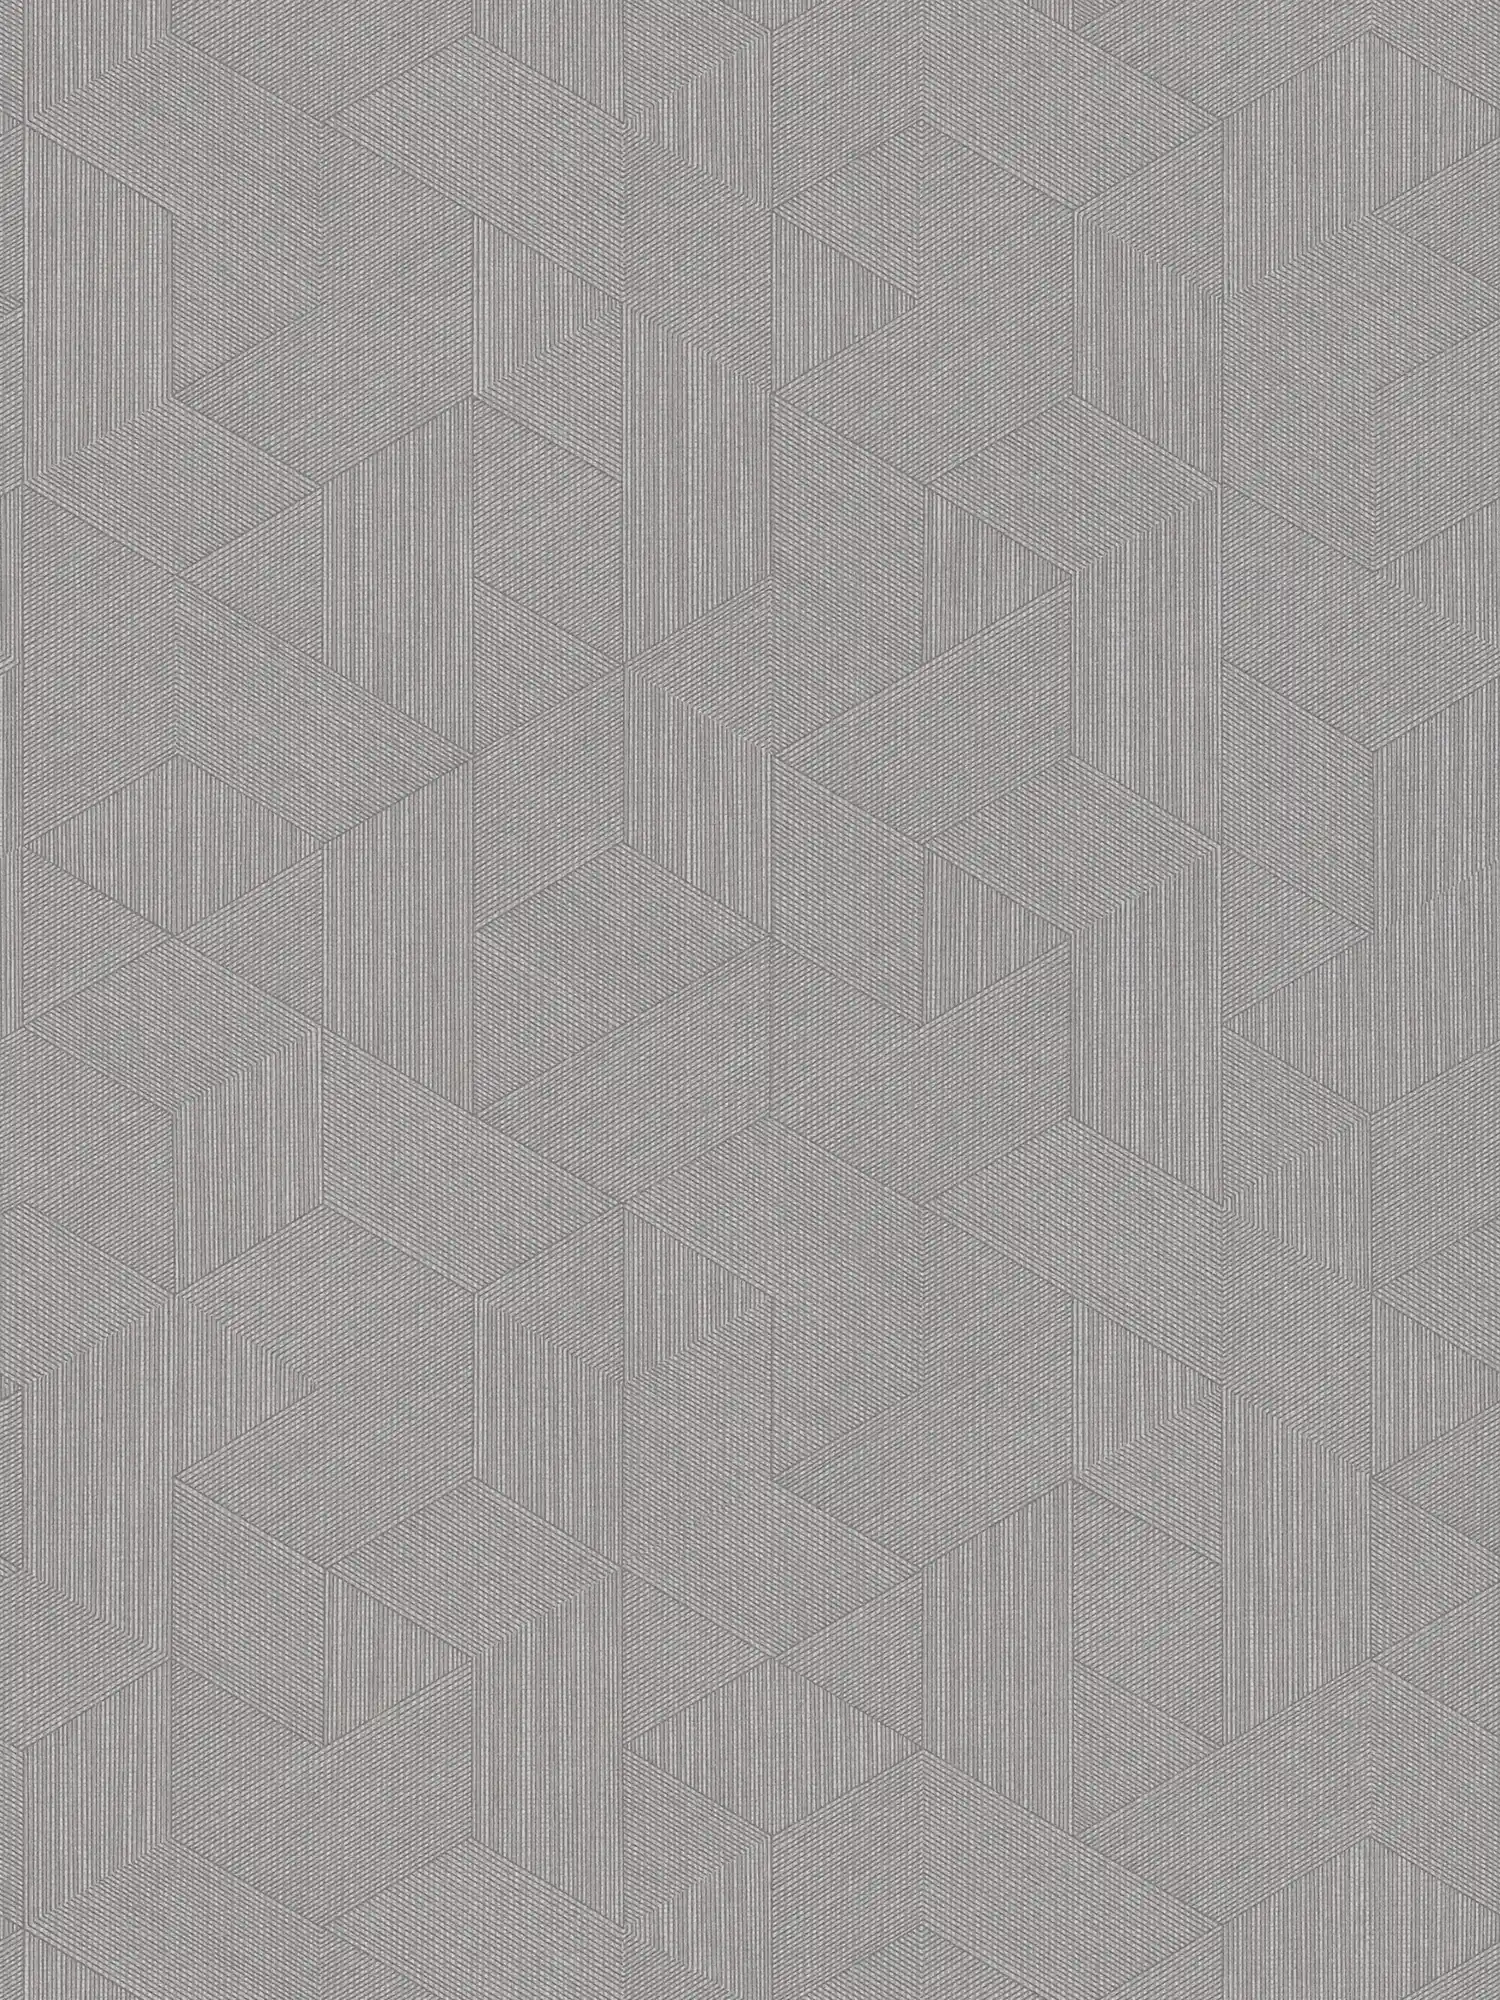 Wallpaper grey with graphic pattern & glossy effect - grey, brown
